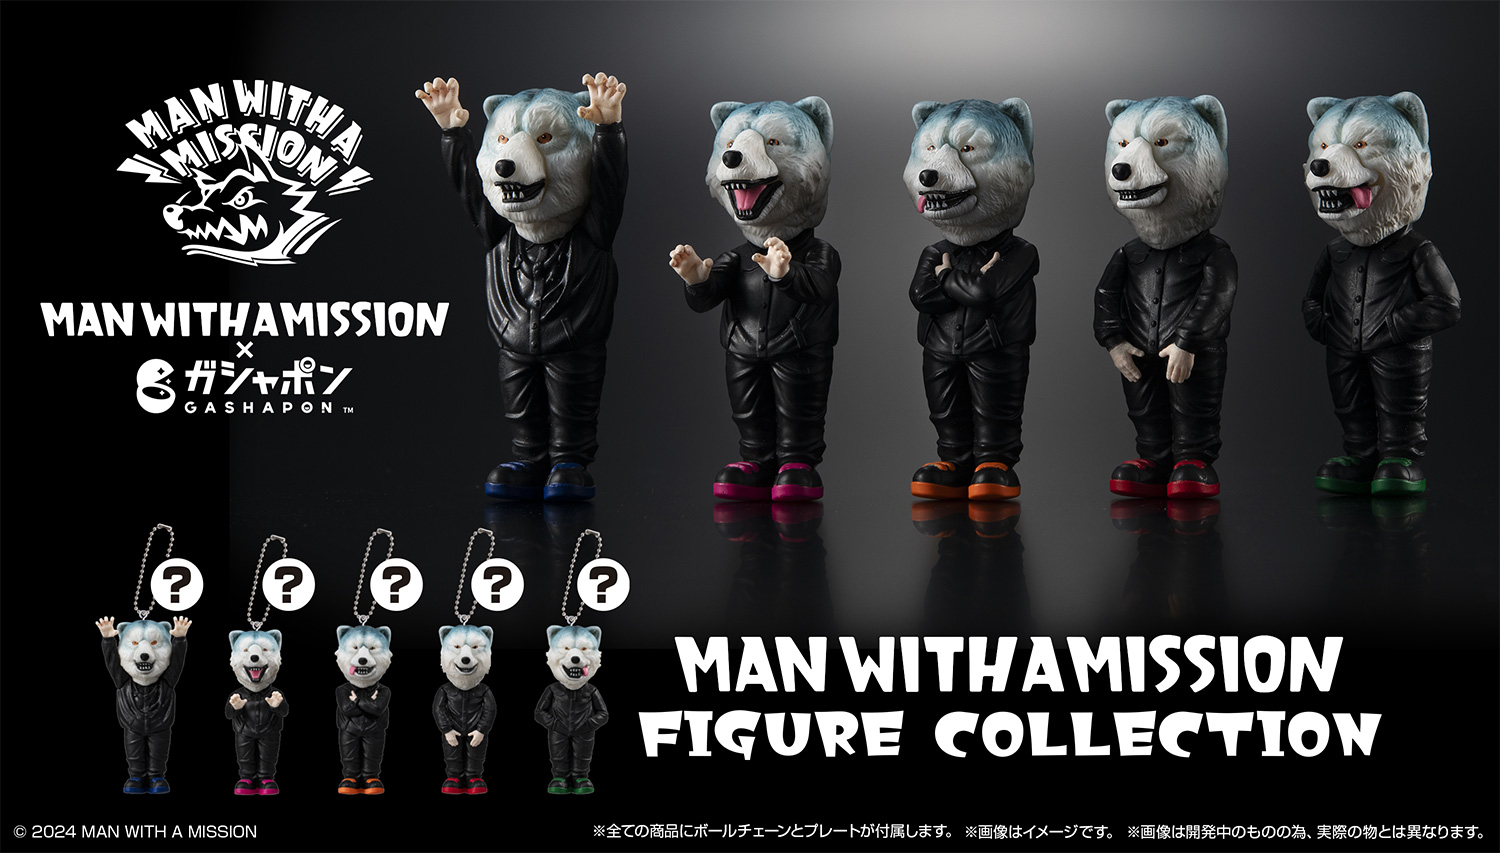 MAN WITH A MISSION×ガシャポン®『MAN WITH A MISSION FIGURE COLLECTION』